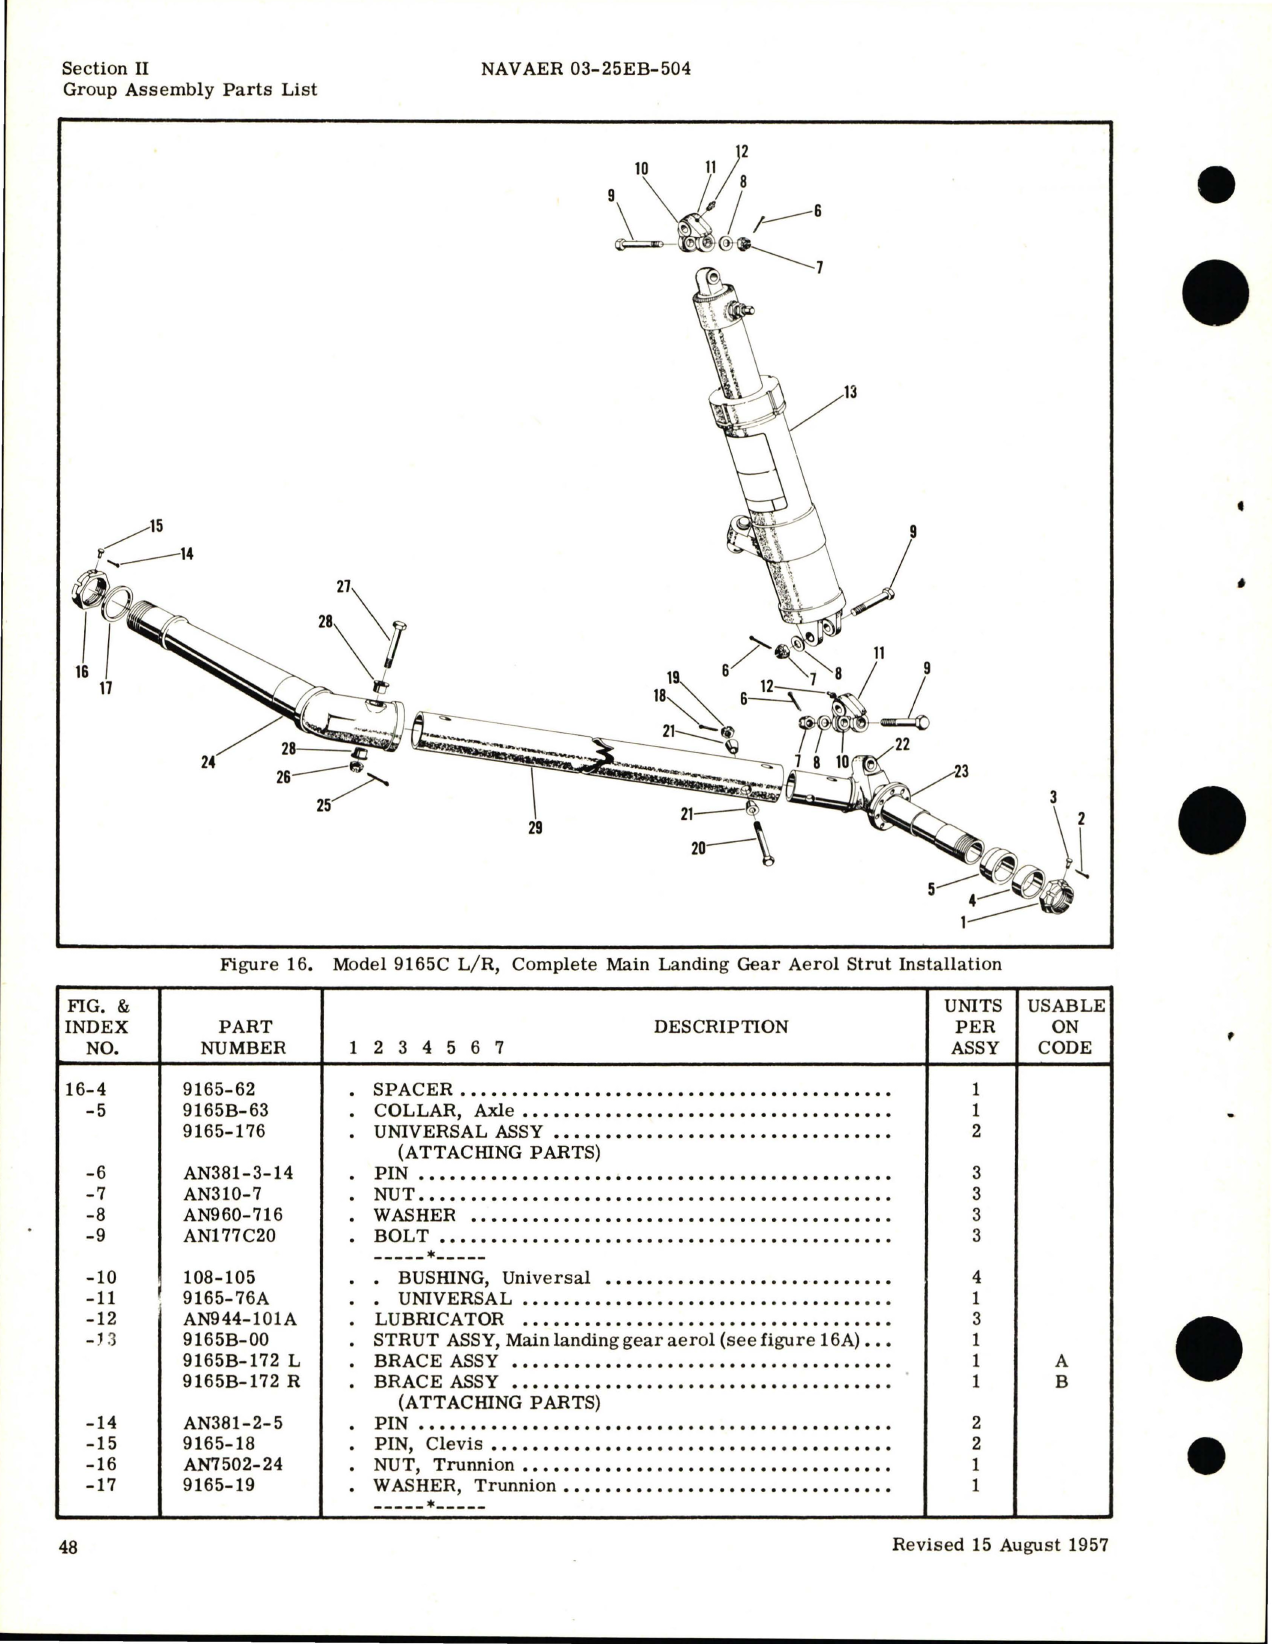 Sample page 6 from AirCorps Library document: Illustrated Parts Breakdown for Landing Gear Aerol Struts 